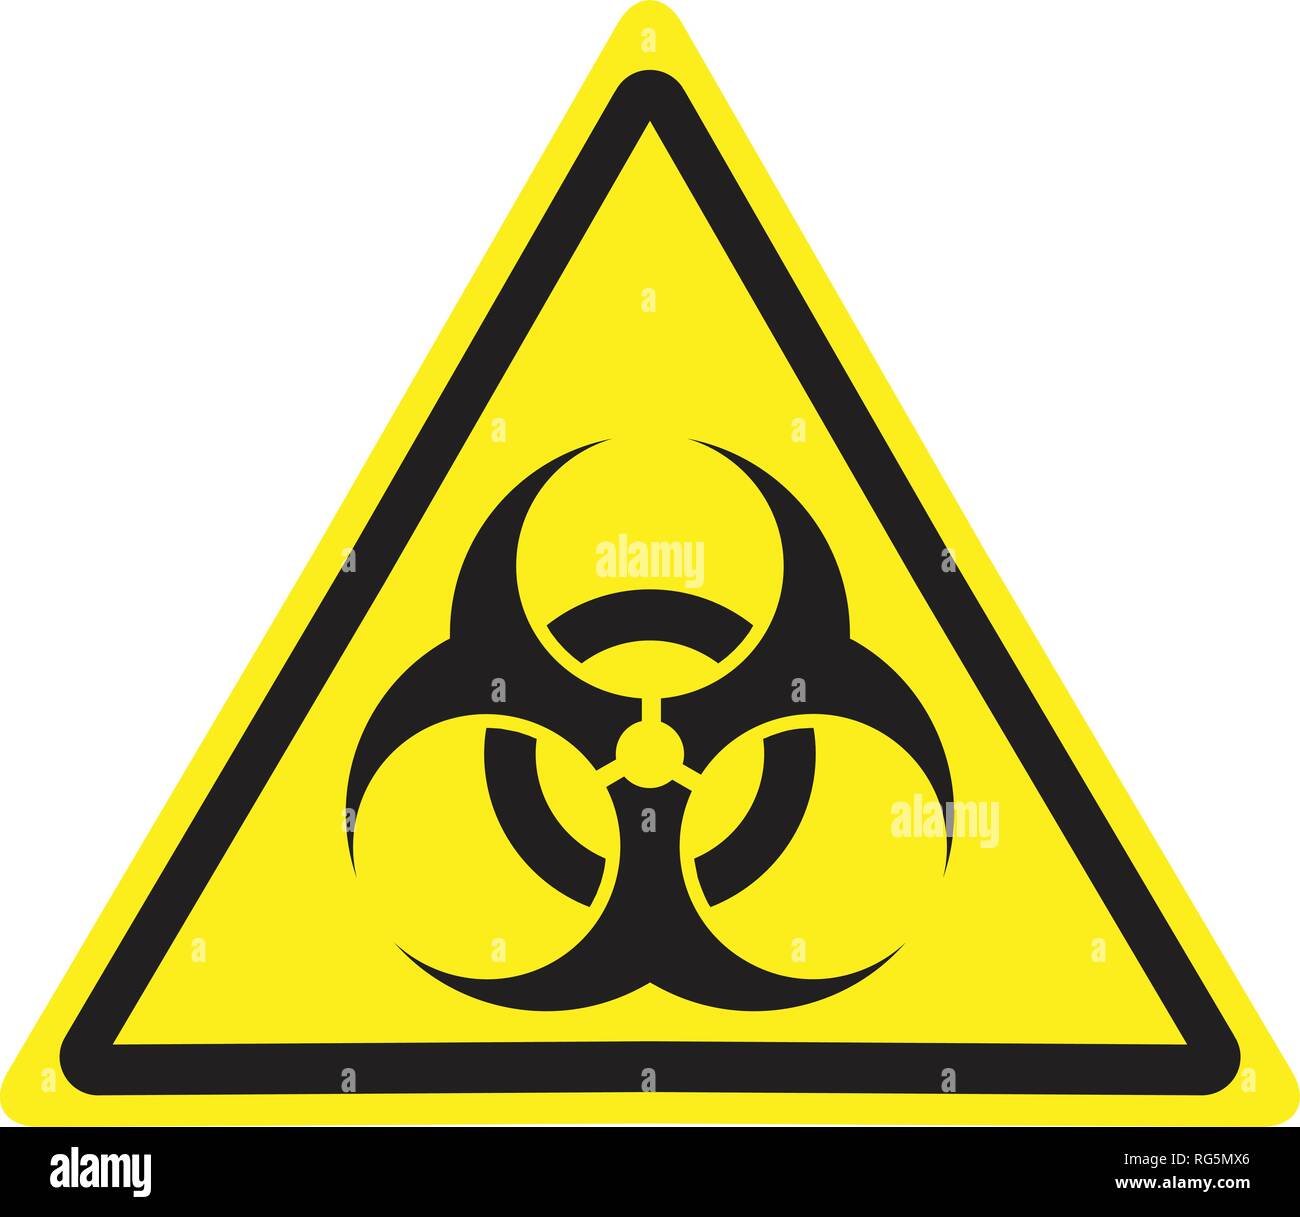 Yellow triangle warning sign with Biohazard symbol. Stock Vector